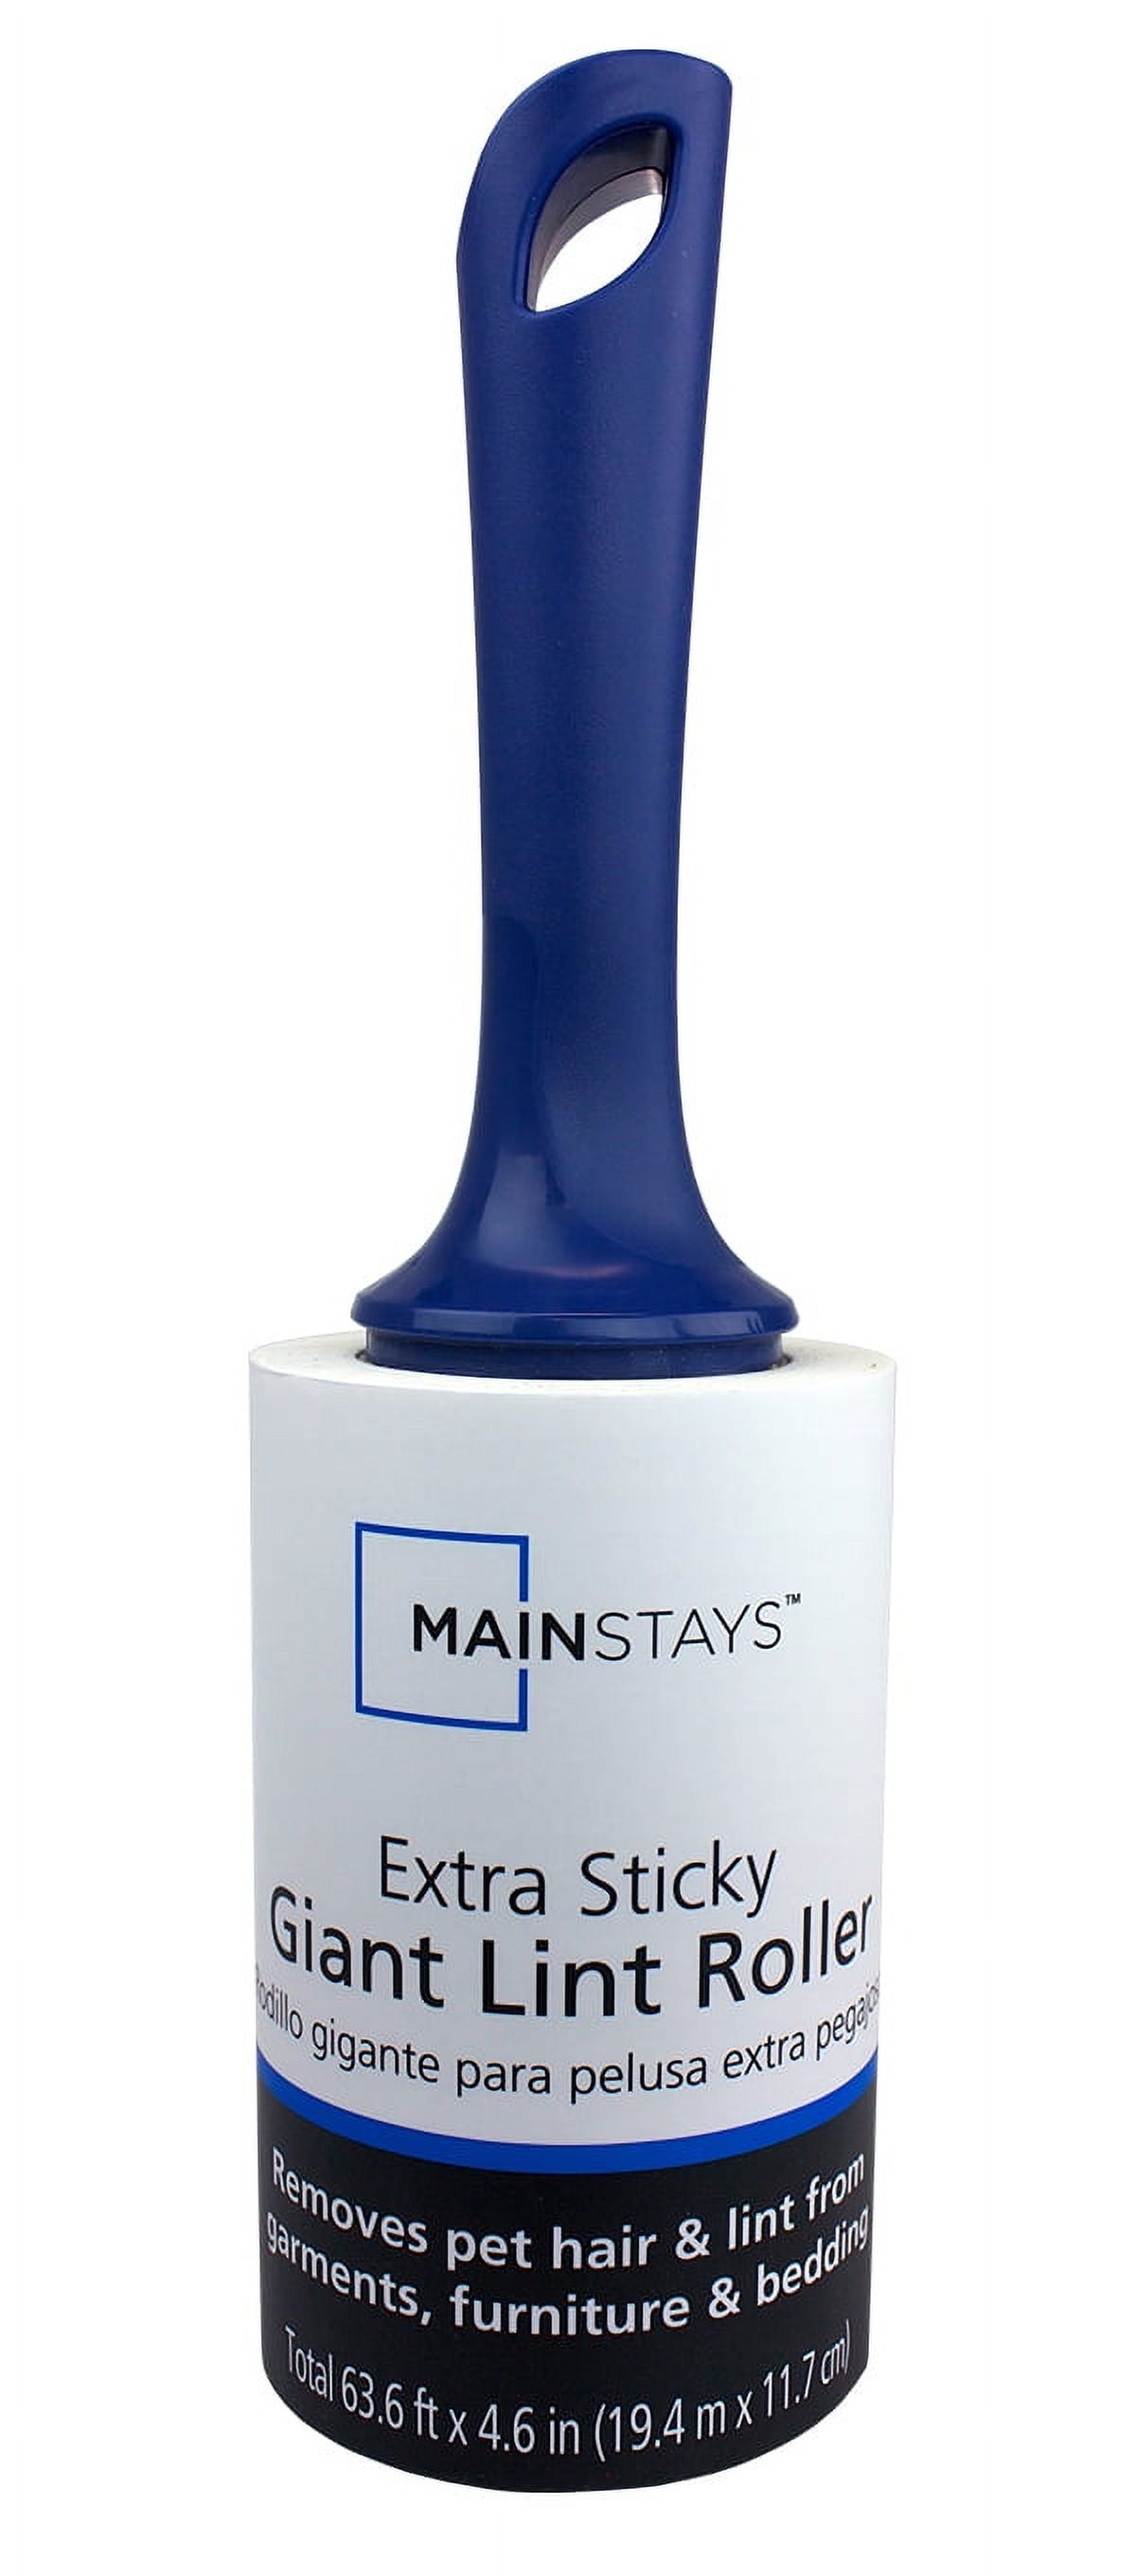 Mainstays Extra Sticky 100-Sheet Giant Lint Roller with 4.6" Tall Sheets - image 1 of 5